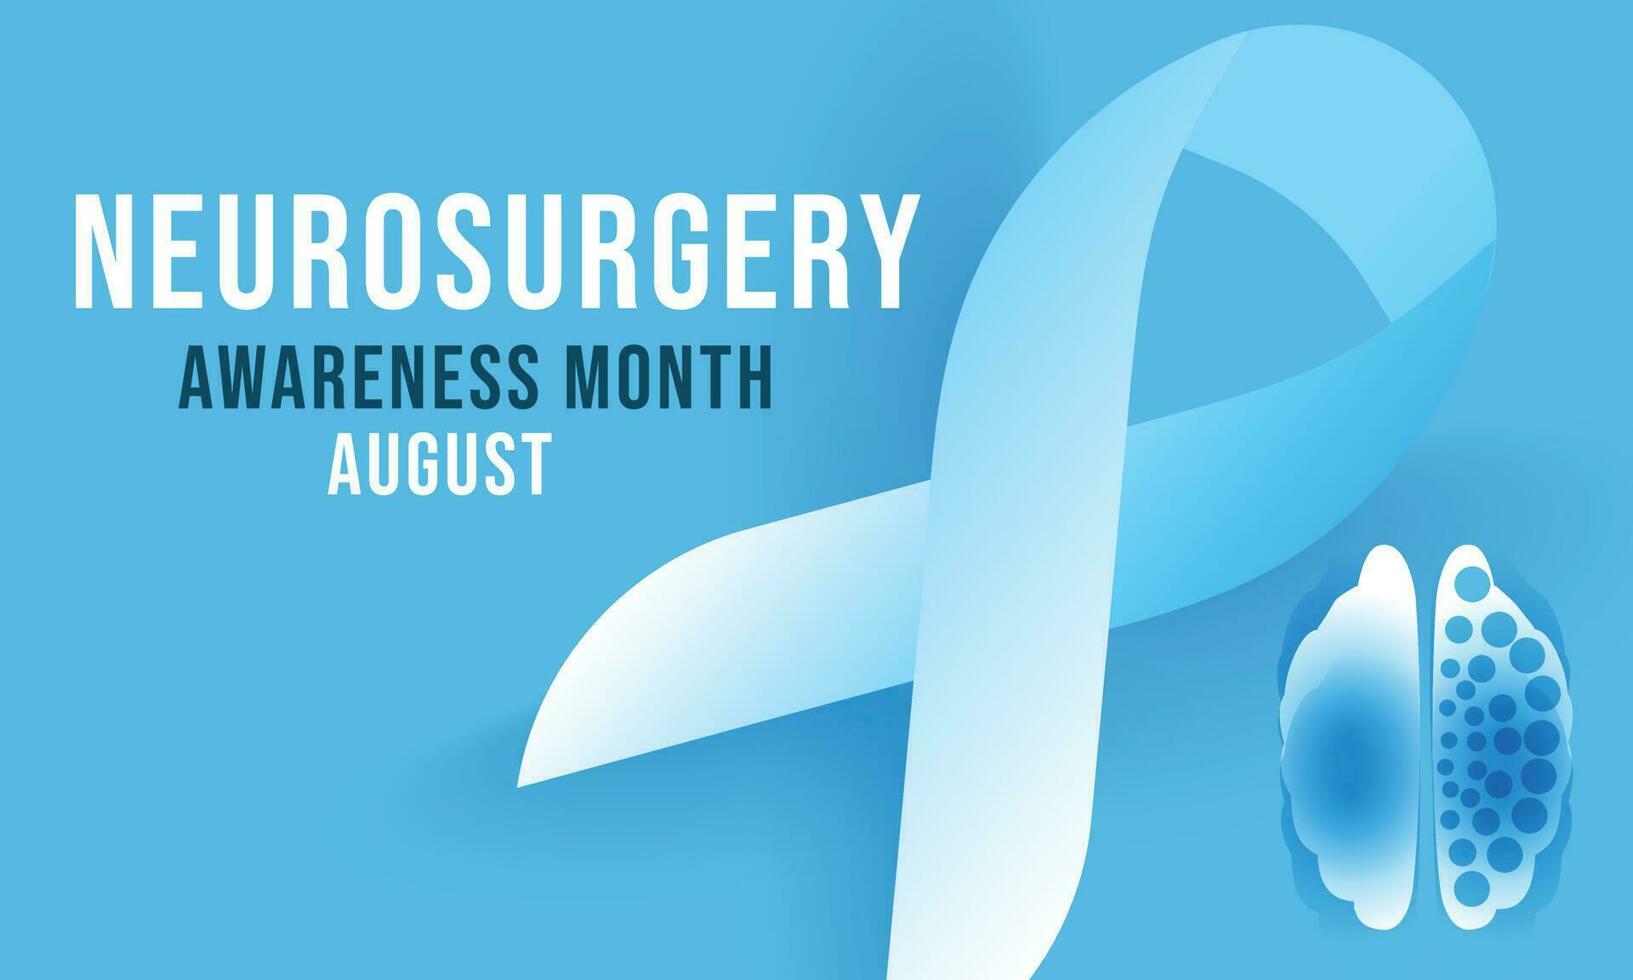 August is Neurosurgery awareness month. background, banner, card, poster, template. Vector illustration.